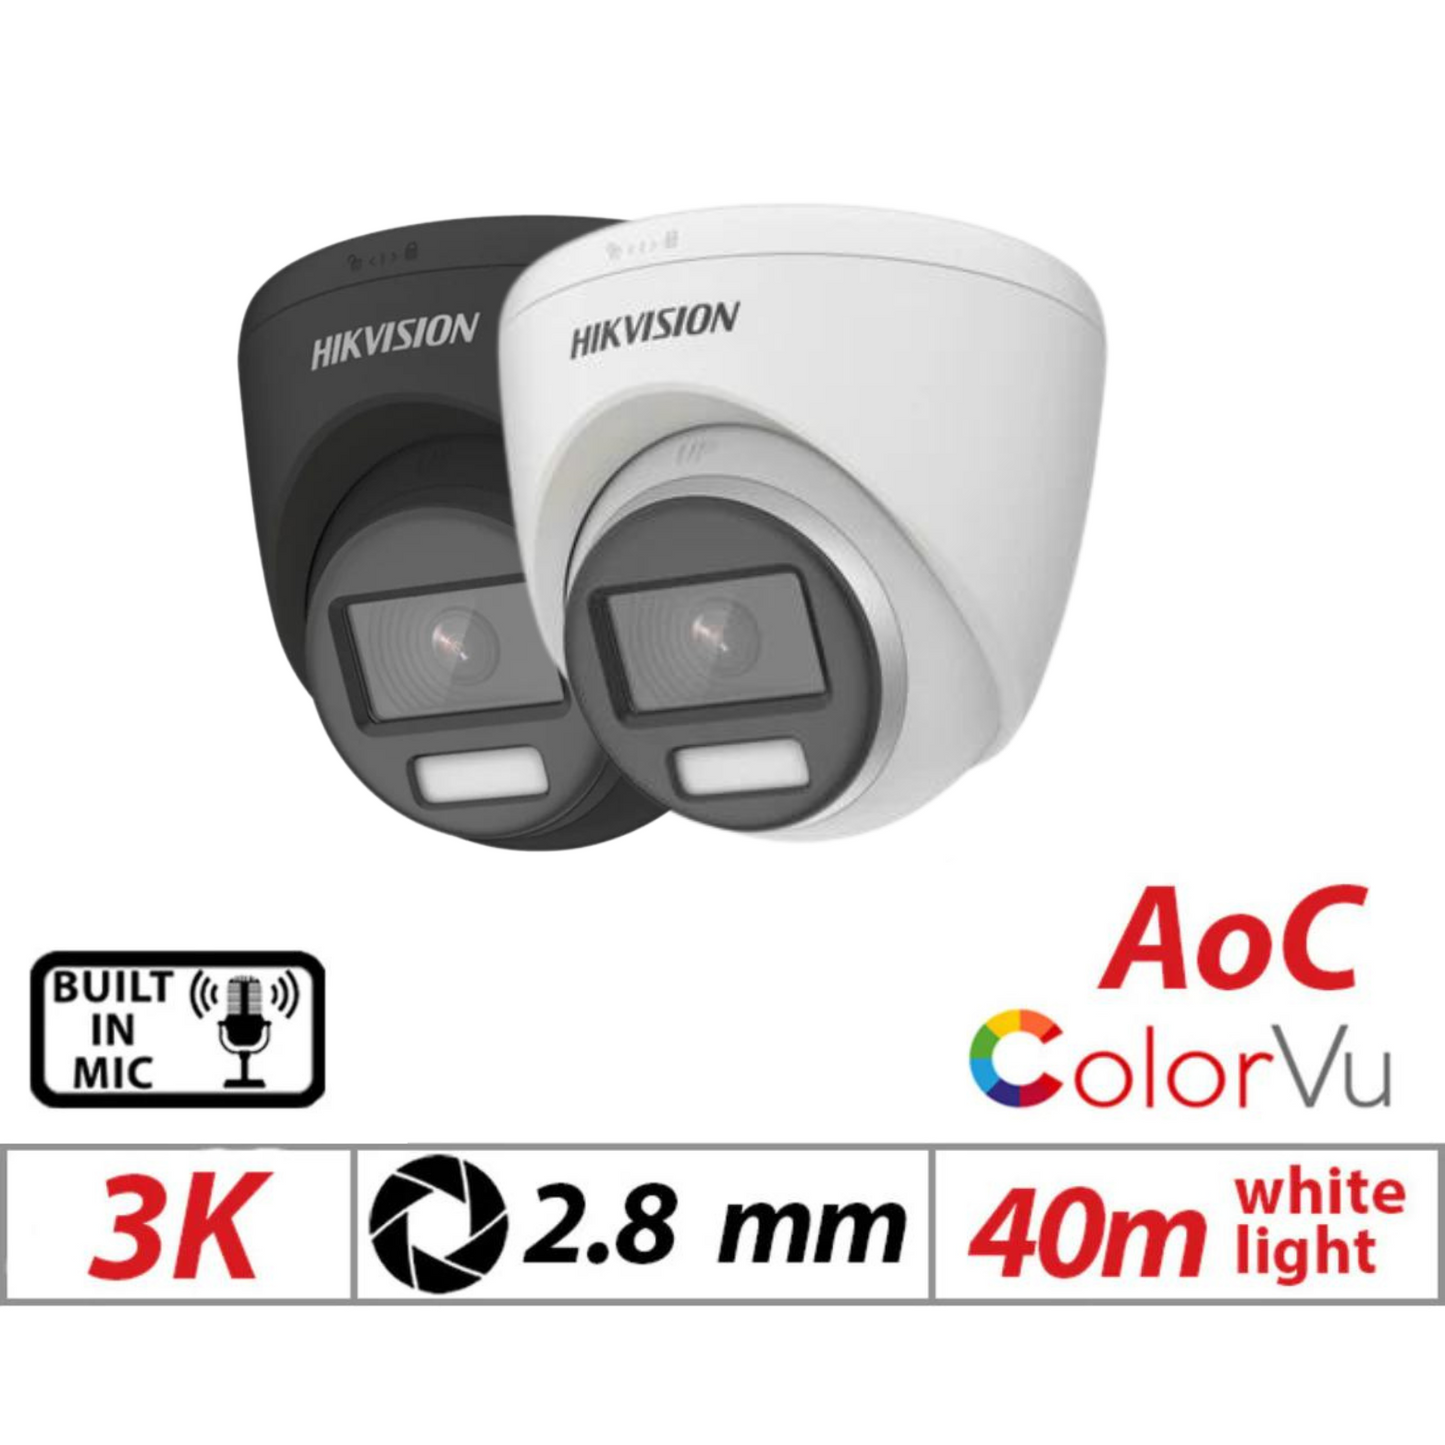 3k 5mp Hikvision Colorvu AOC Fixed Turret Camera with Built-in Mic 2.8mm DS-2CE72KF0T-FS